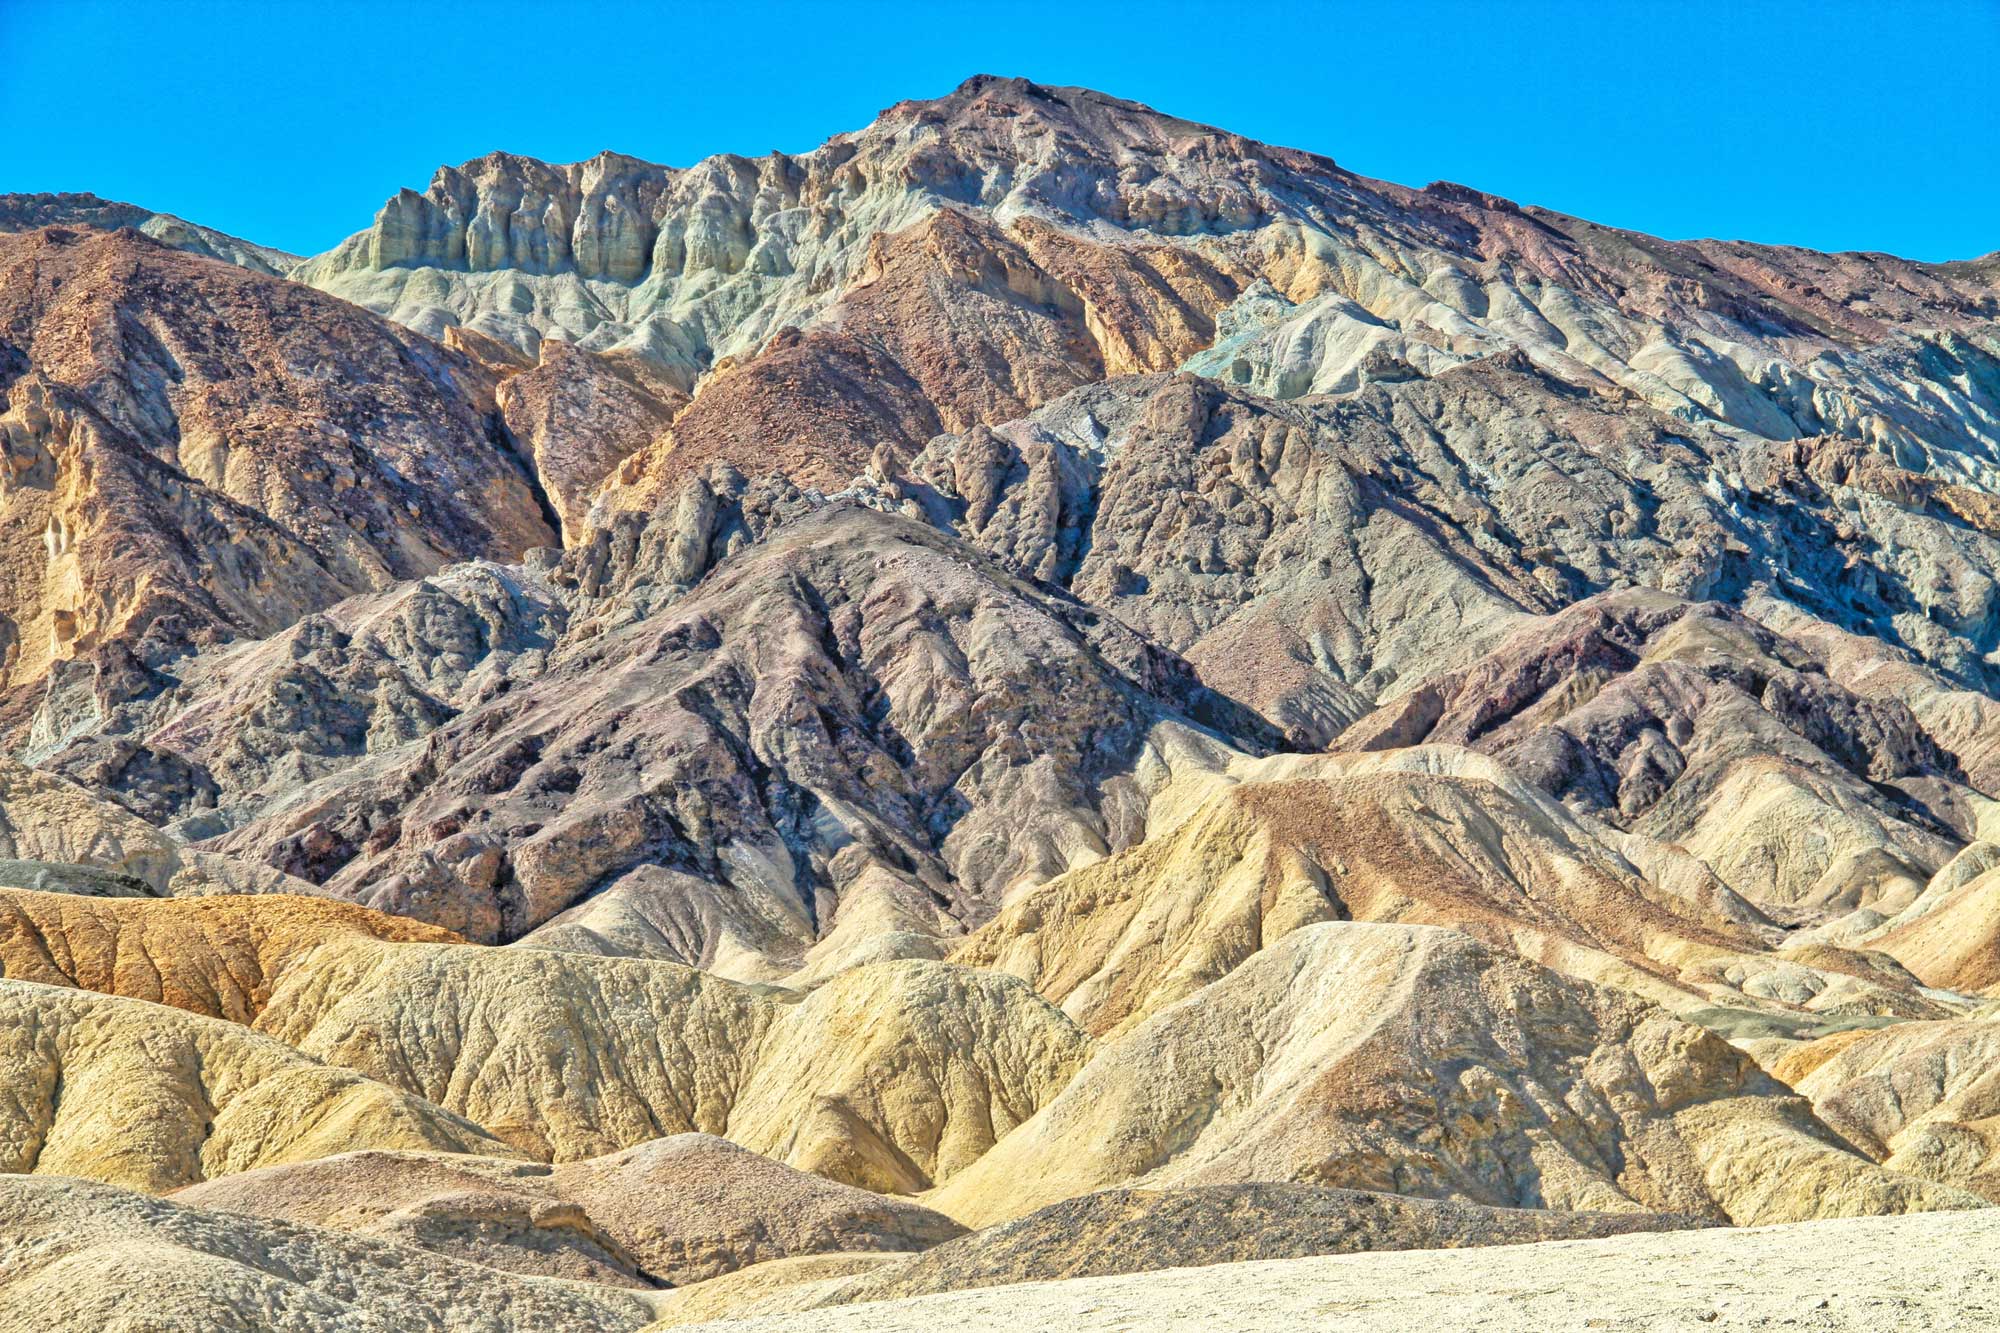 Photograph of the Artist's Palette in Death Valley. The photo shows a landscape of badlands with no visible vegetation. Badlands range in color yellowish to slightly pinkish to orange to greenish.